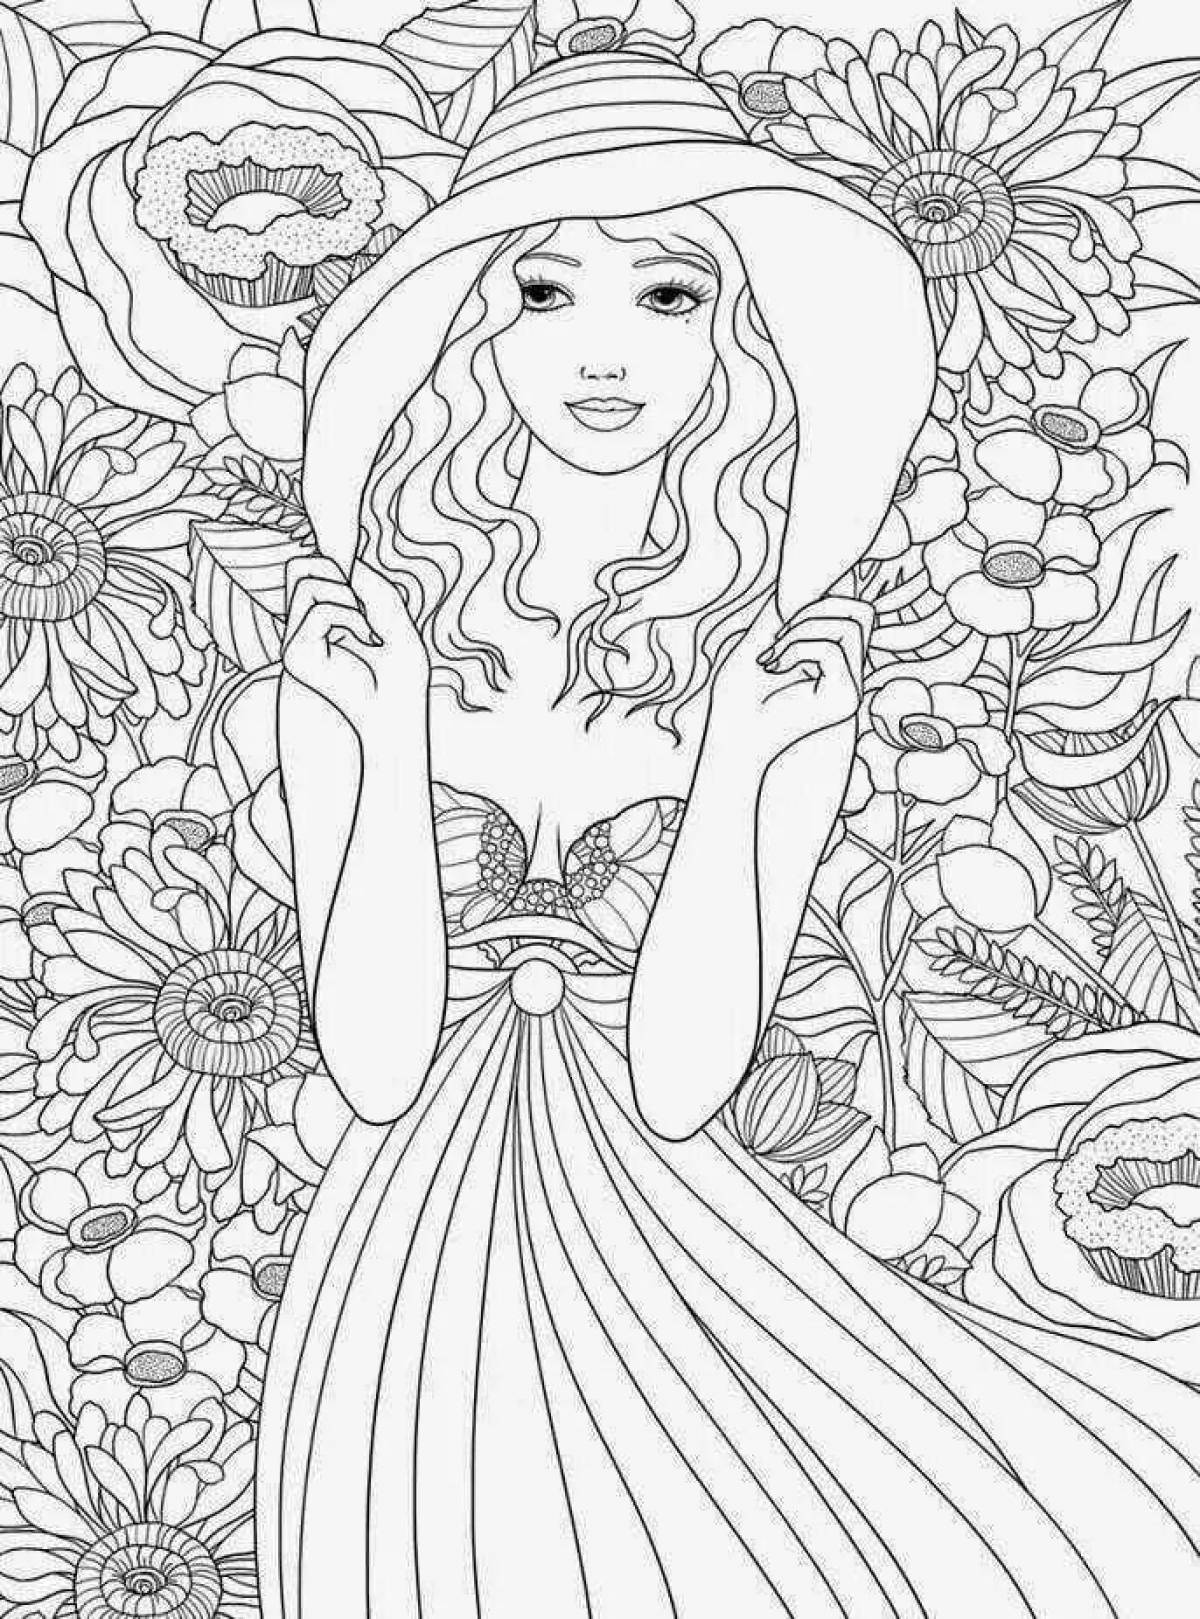 A fascinating coloring book for girls 10 years old, beautiful